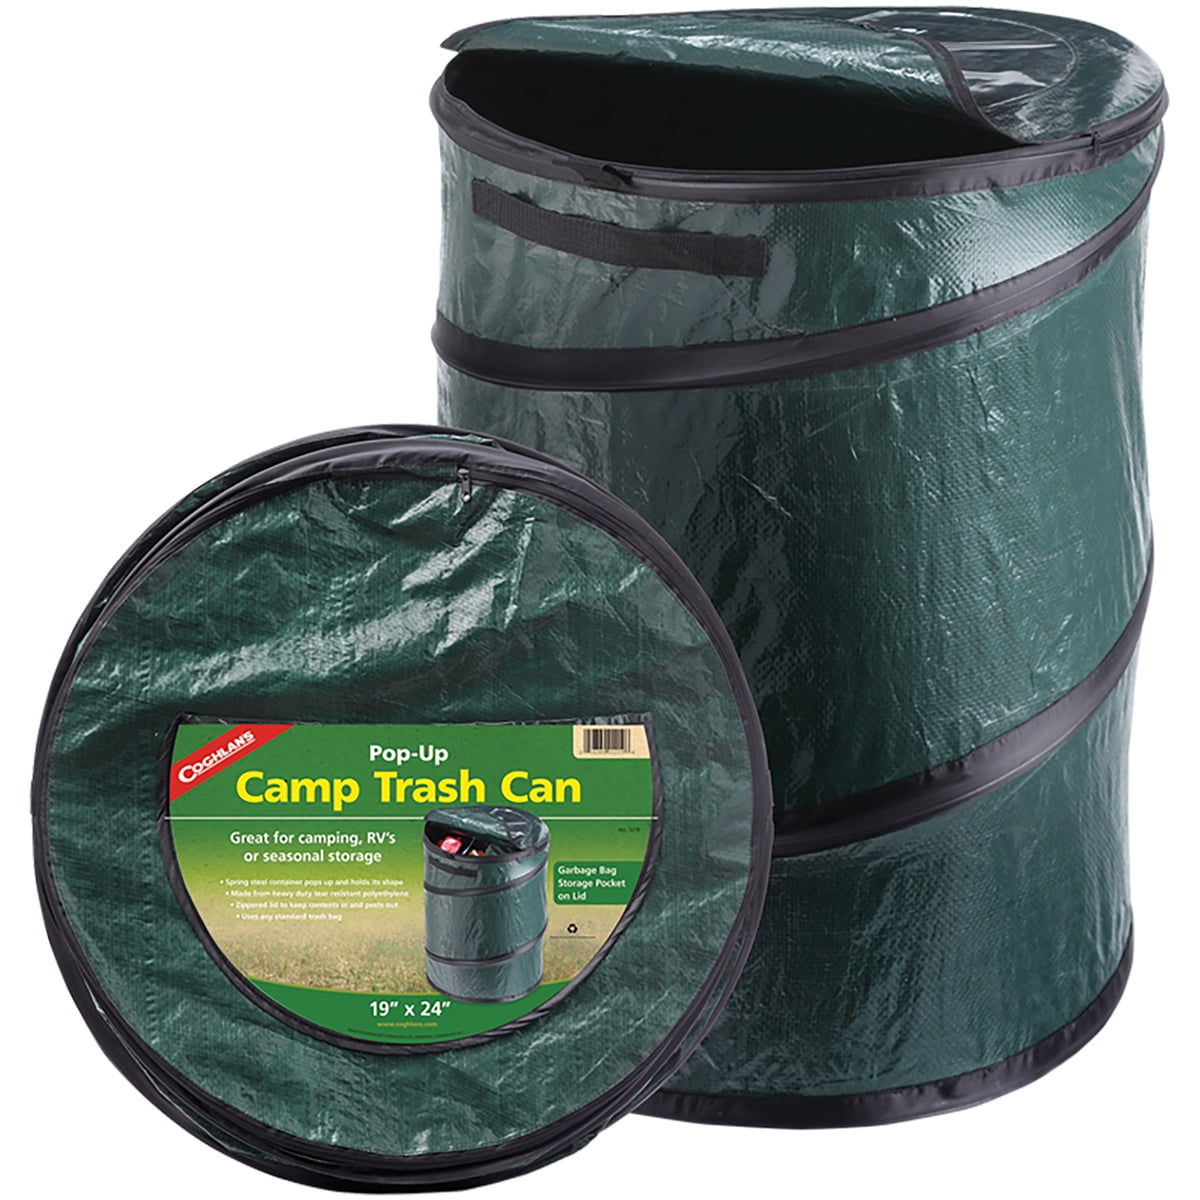 Dropship Portable Pop Up Trash Bin 22-Gallon Capacity Folding Leaf Bag to  Sell Online at a Lower Price